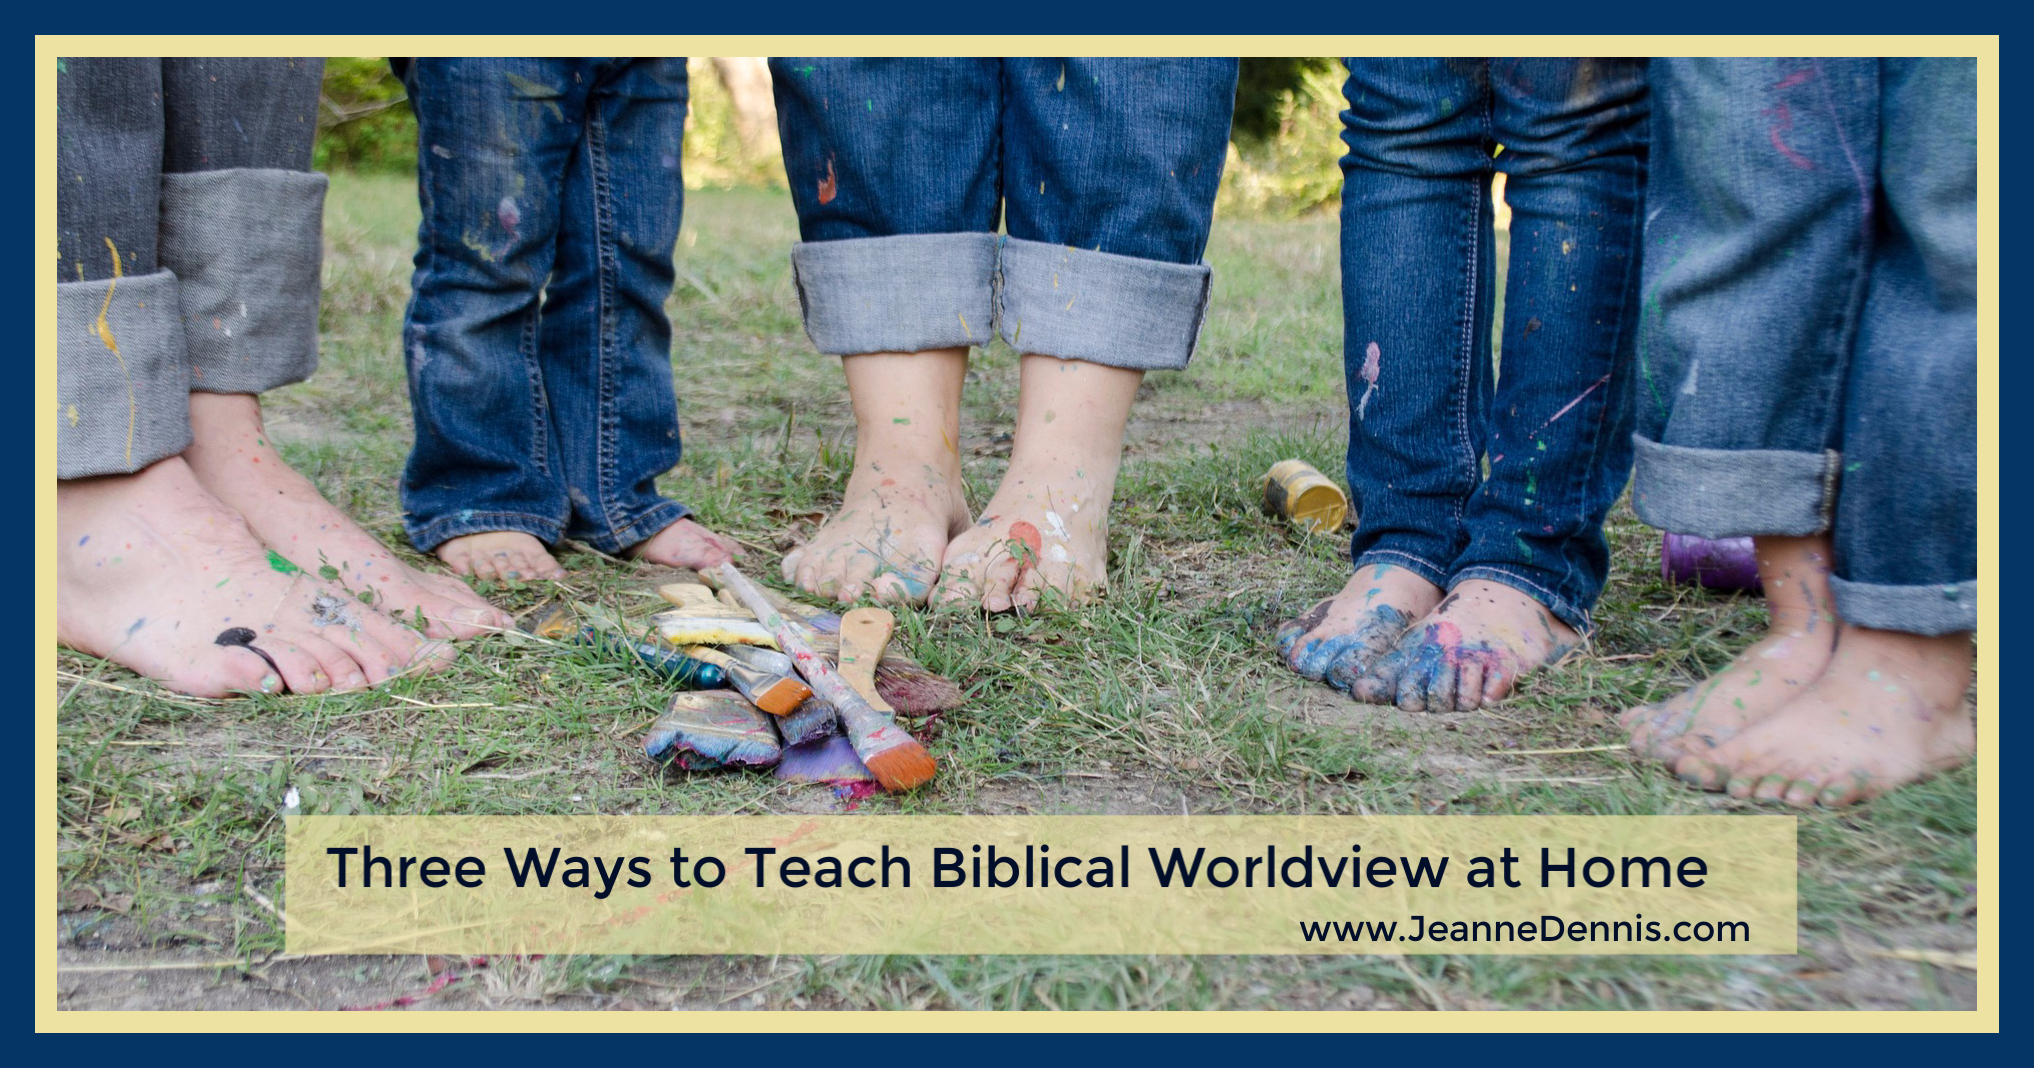 Three Ways to Teach Biblical Worldview at Home